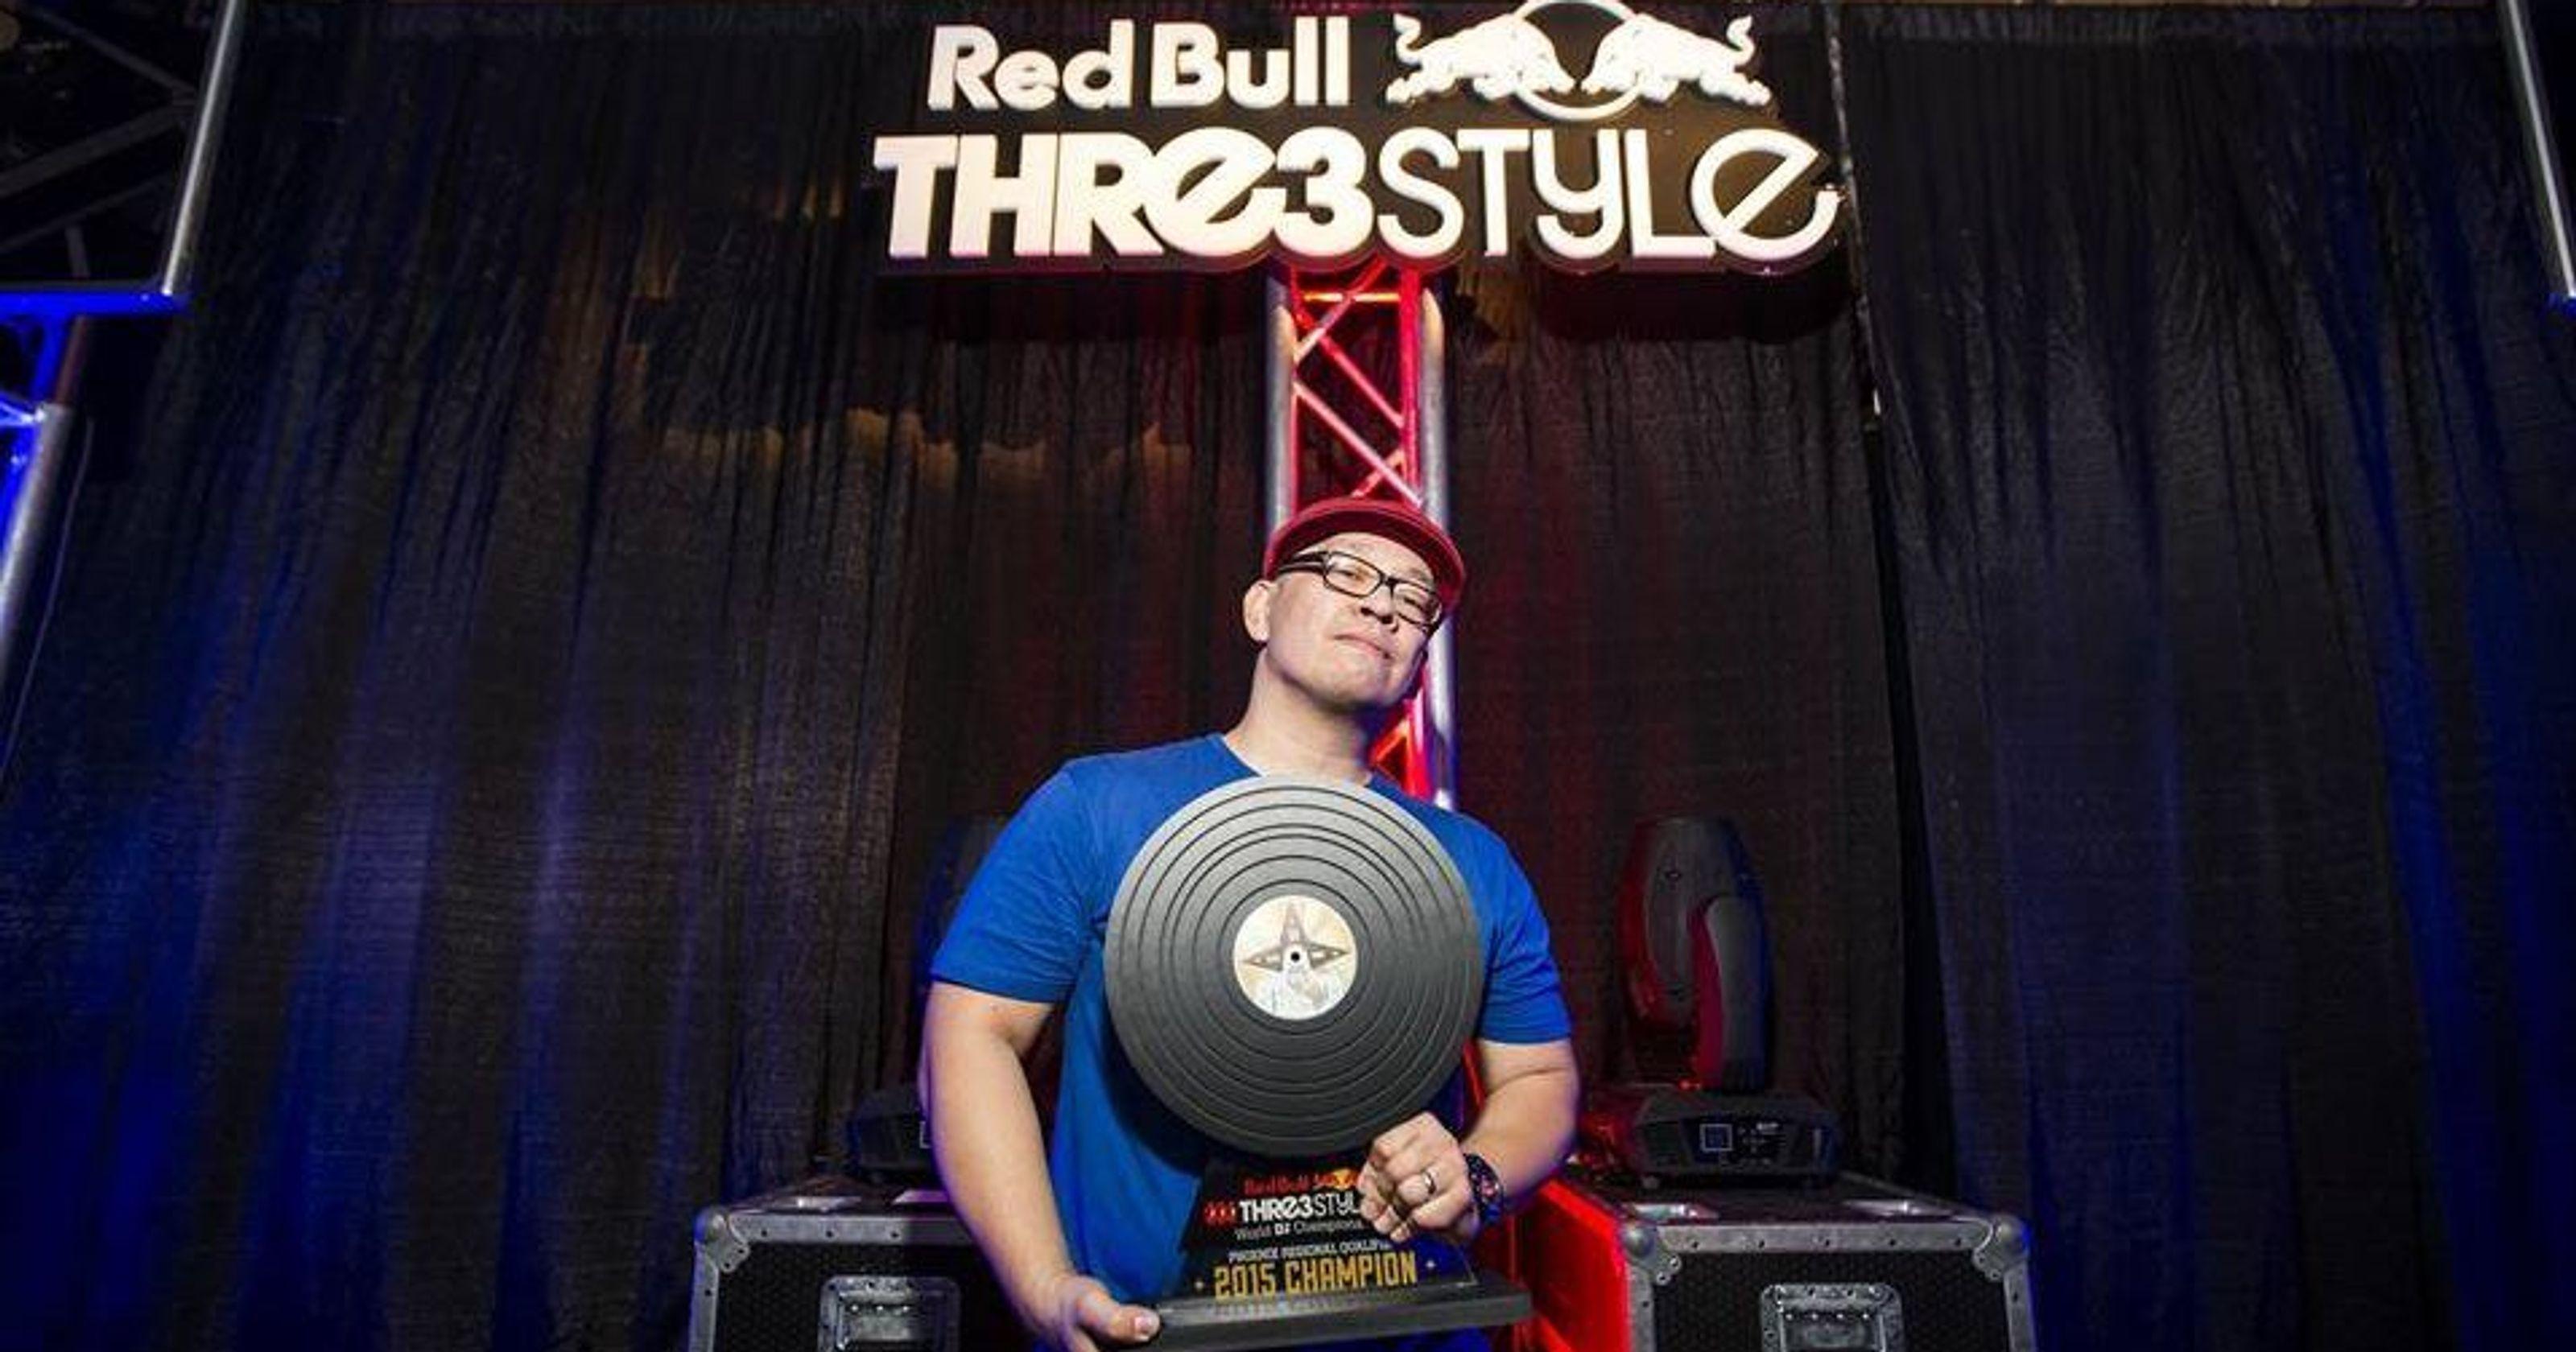 Phoenix Mixed with Red Bull Logo - Red Bull Thre3style DJ Championship in Phoenix, 4/2-4